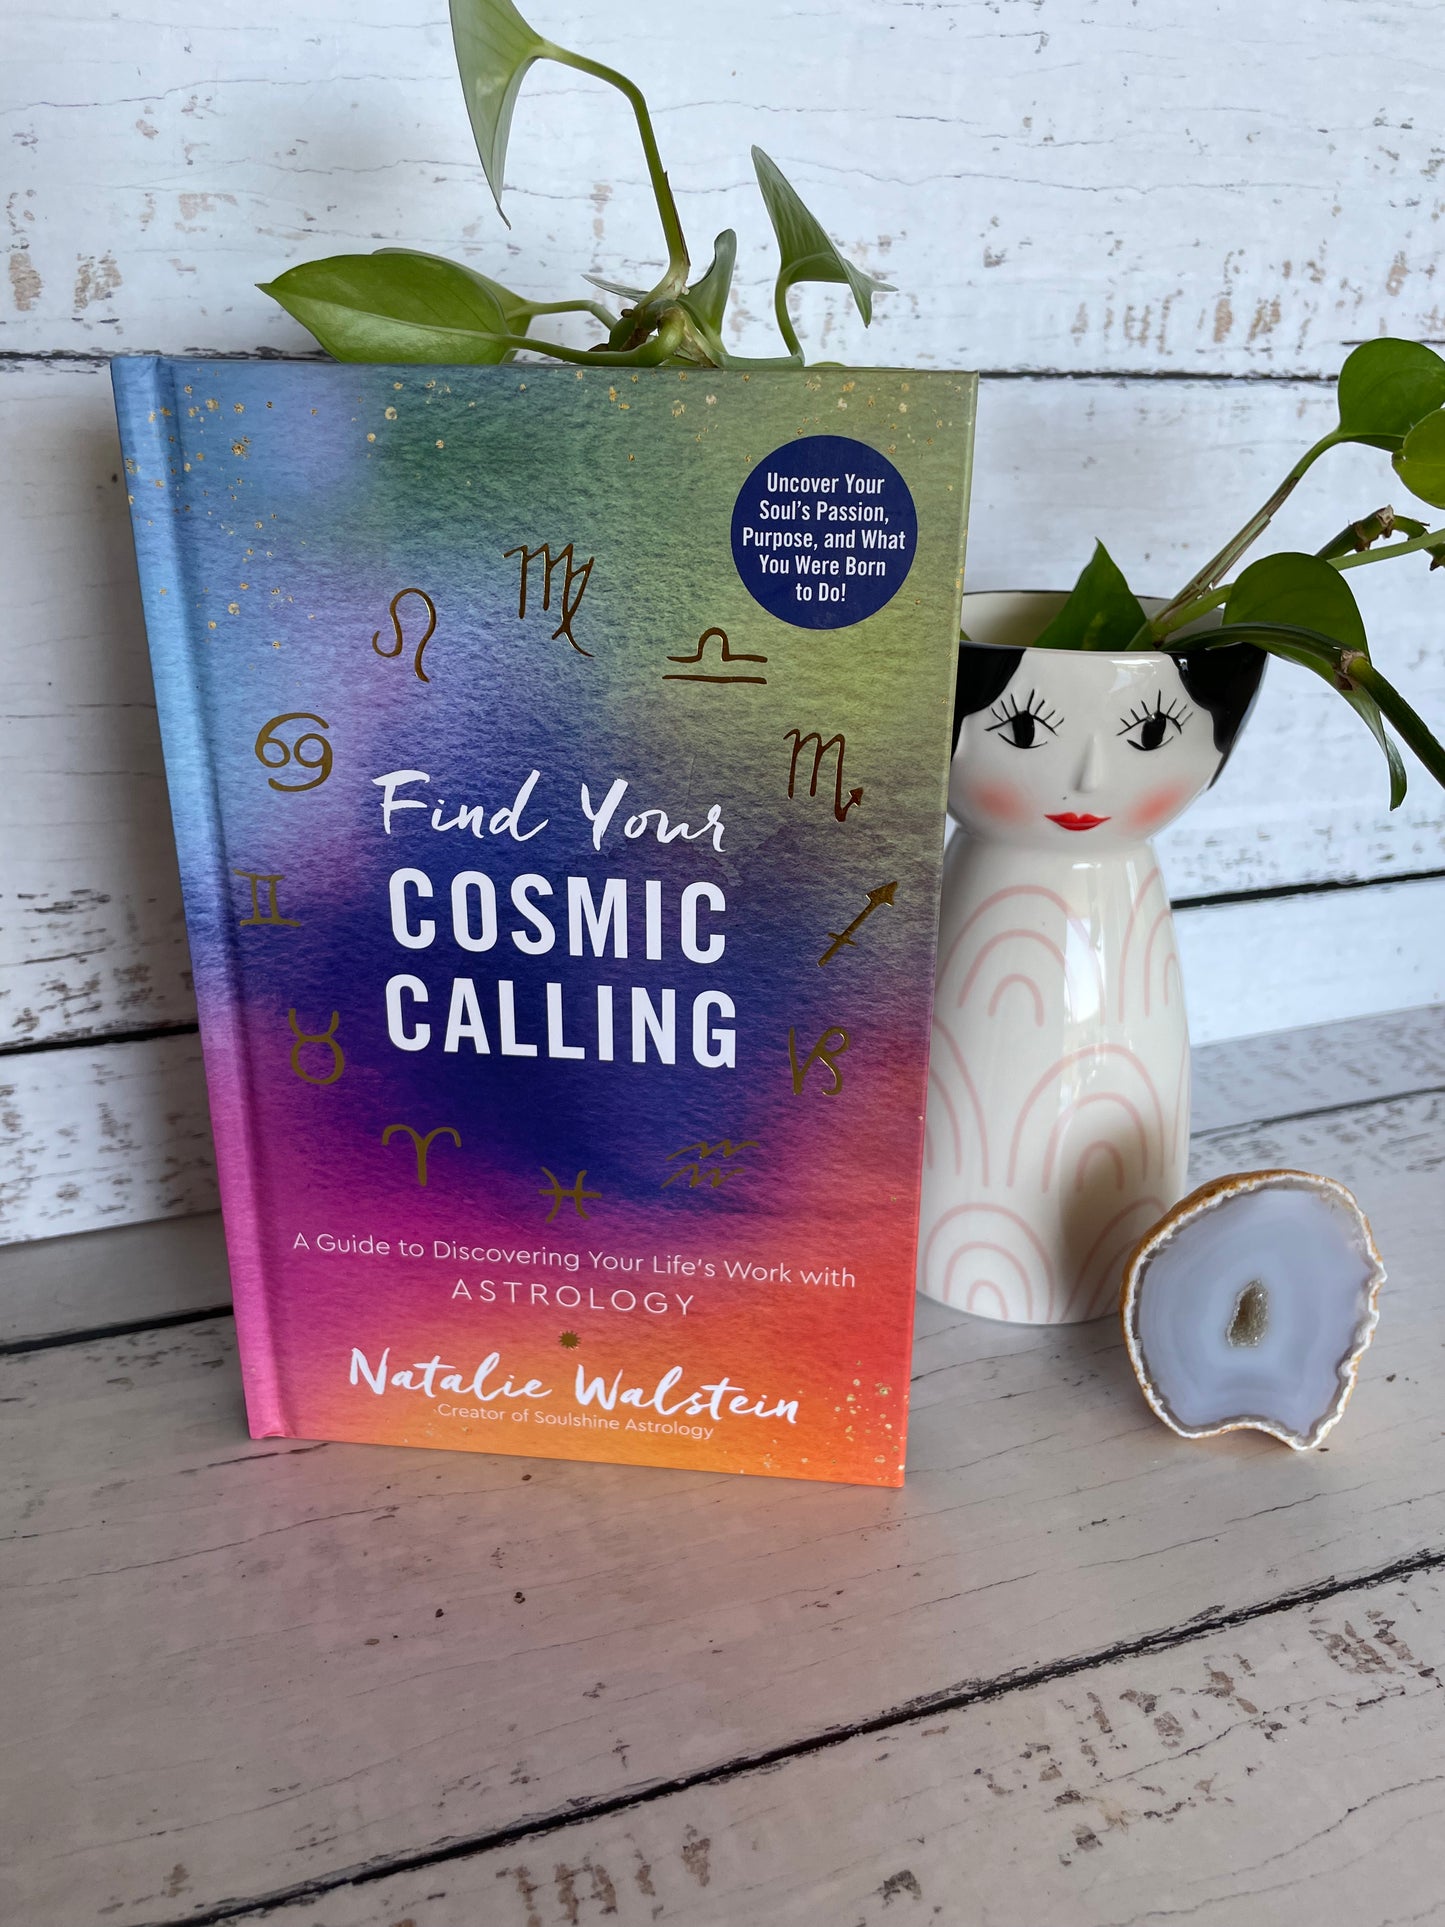 Find your Cosmic Calling